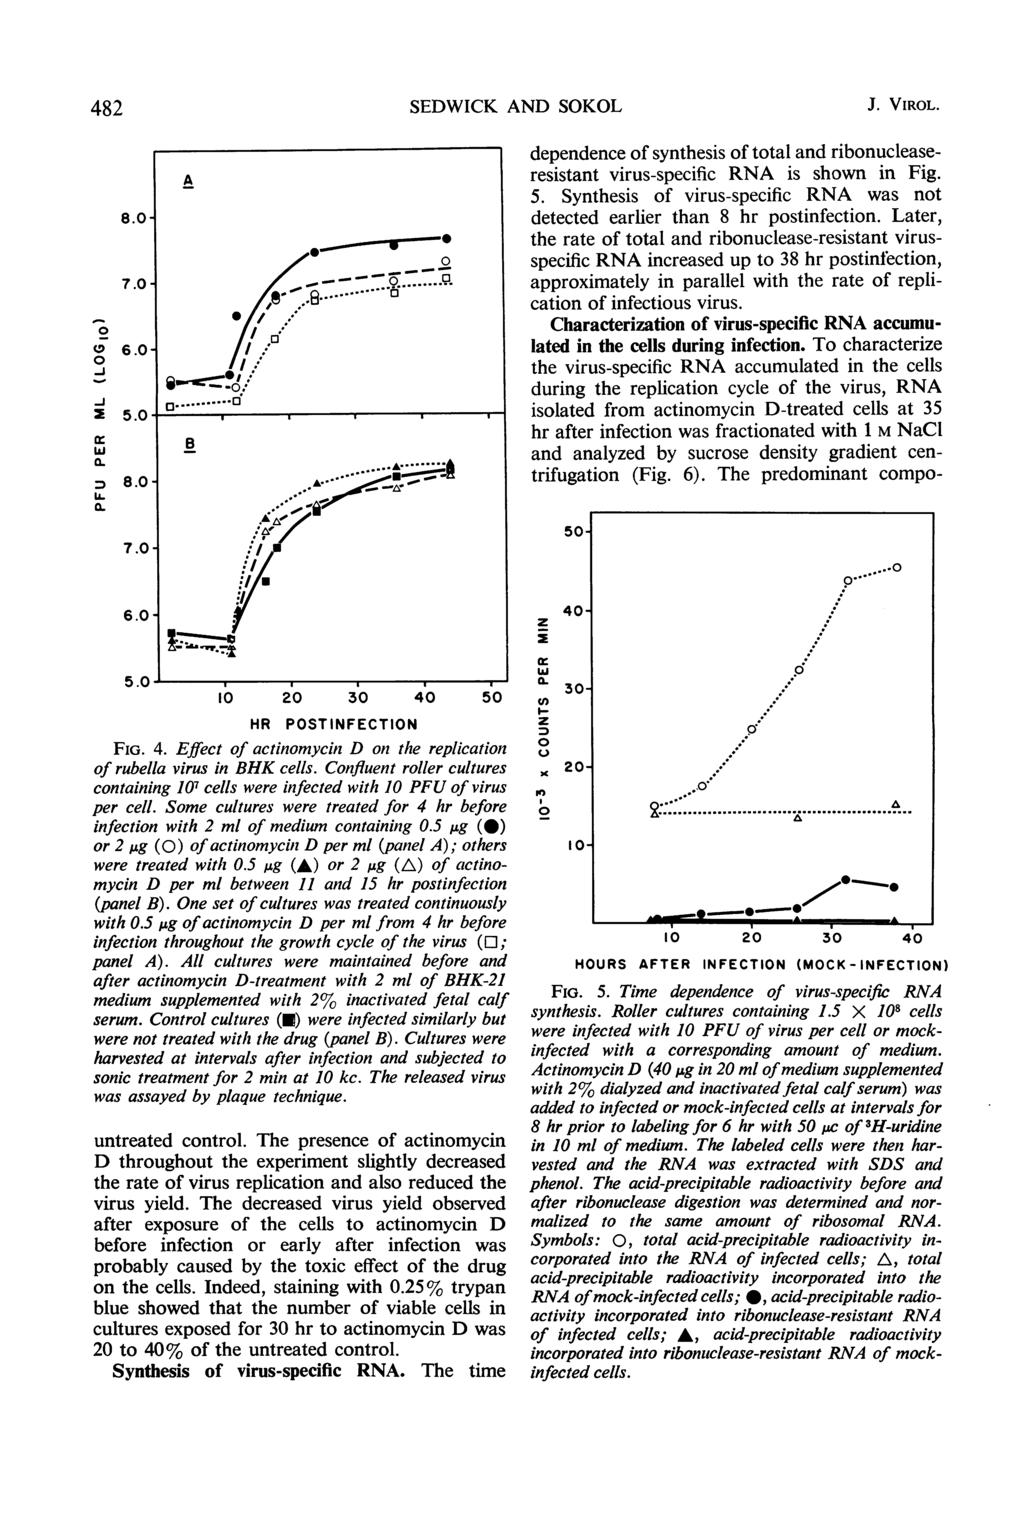 482 (< 6.- -, X 5.... U. 8.j 7.- 6.- B SEDWICK AND SOKOL 5. 1 2 3 4 5 HR POSTINFECTION FIG. 4. Effect of actinomycin D on the replication of rubella virus in BHK cells.